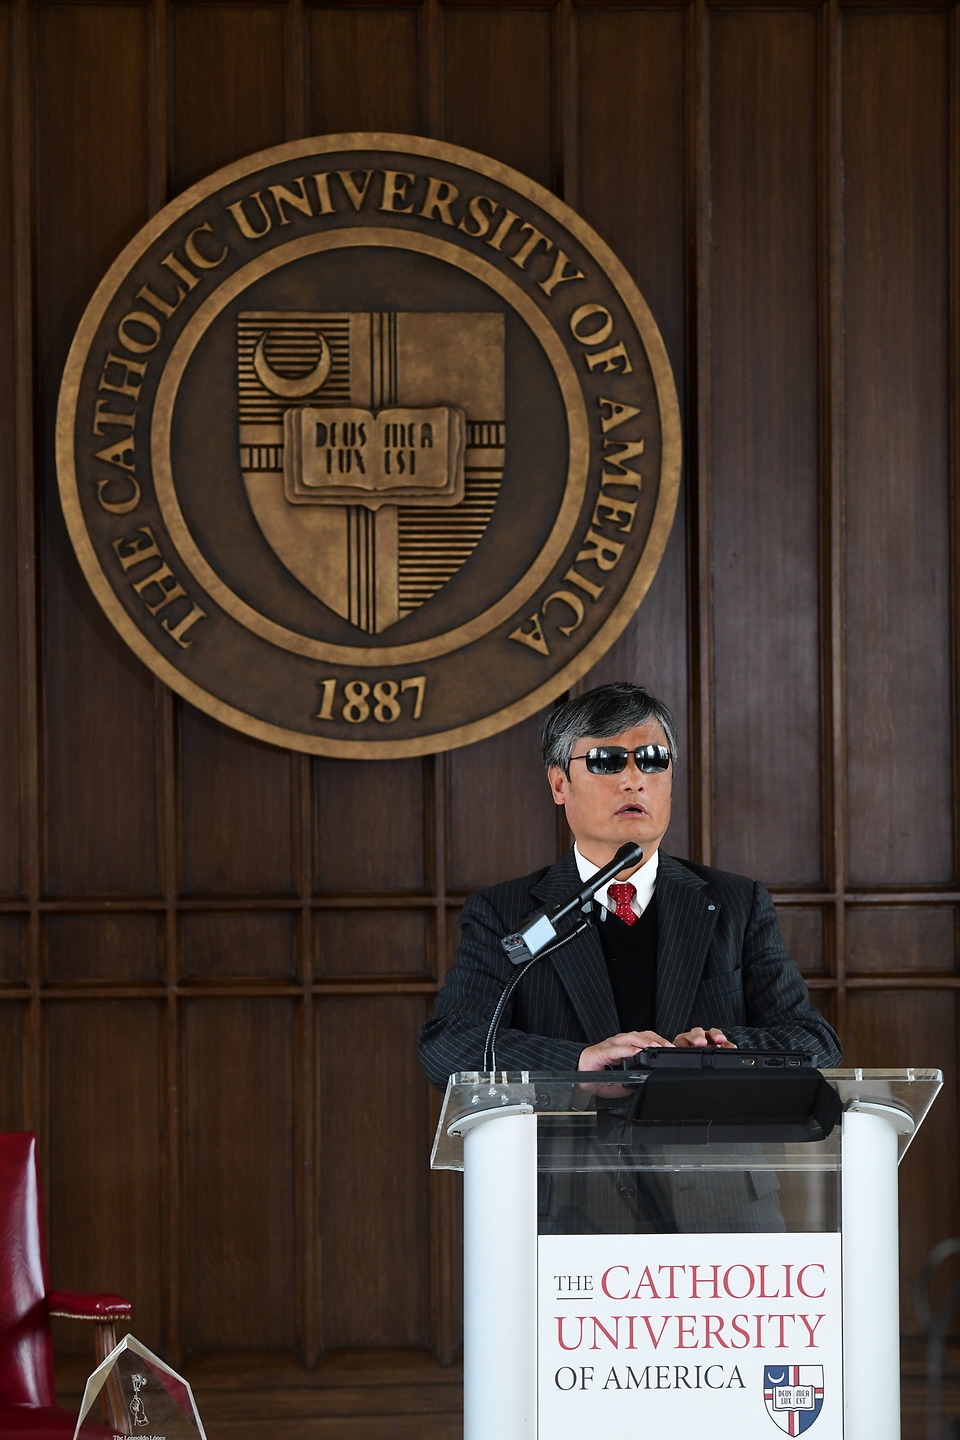 Chen Guancheng gives a speech at a podium in Heritage Hall at The Catholic University of America